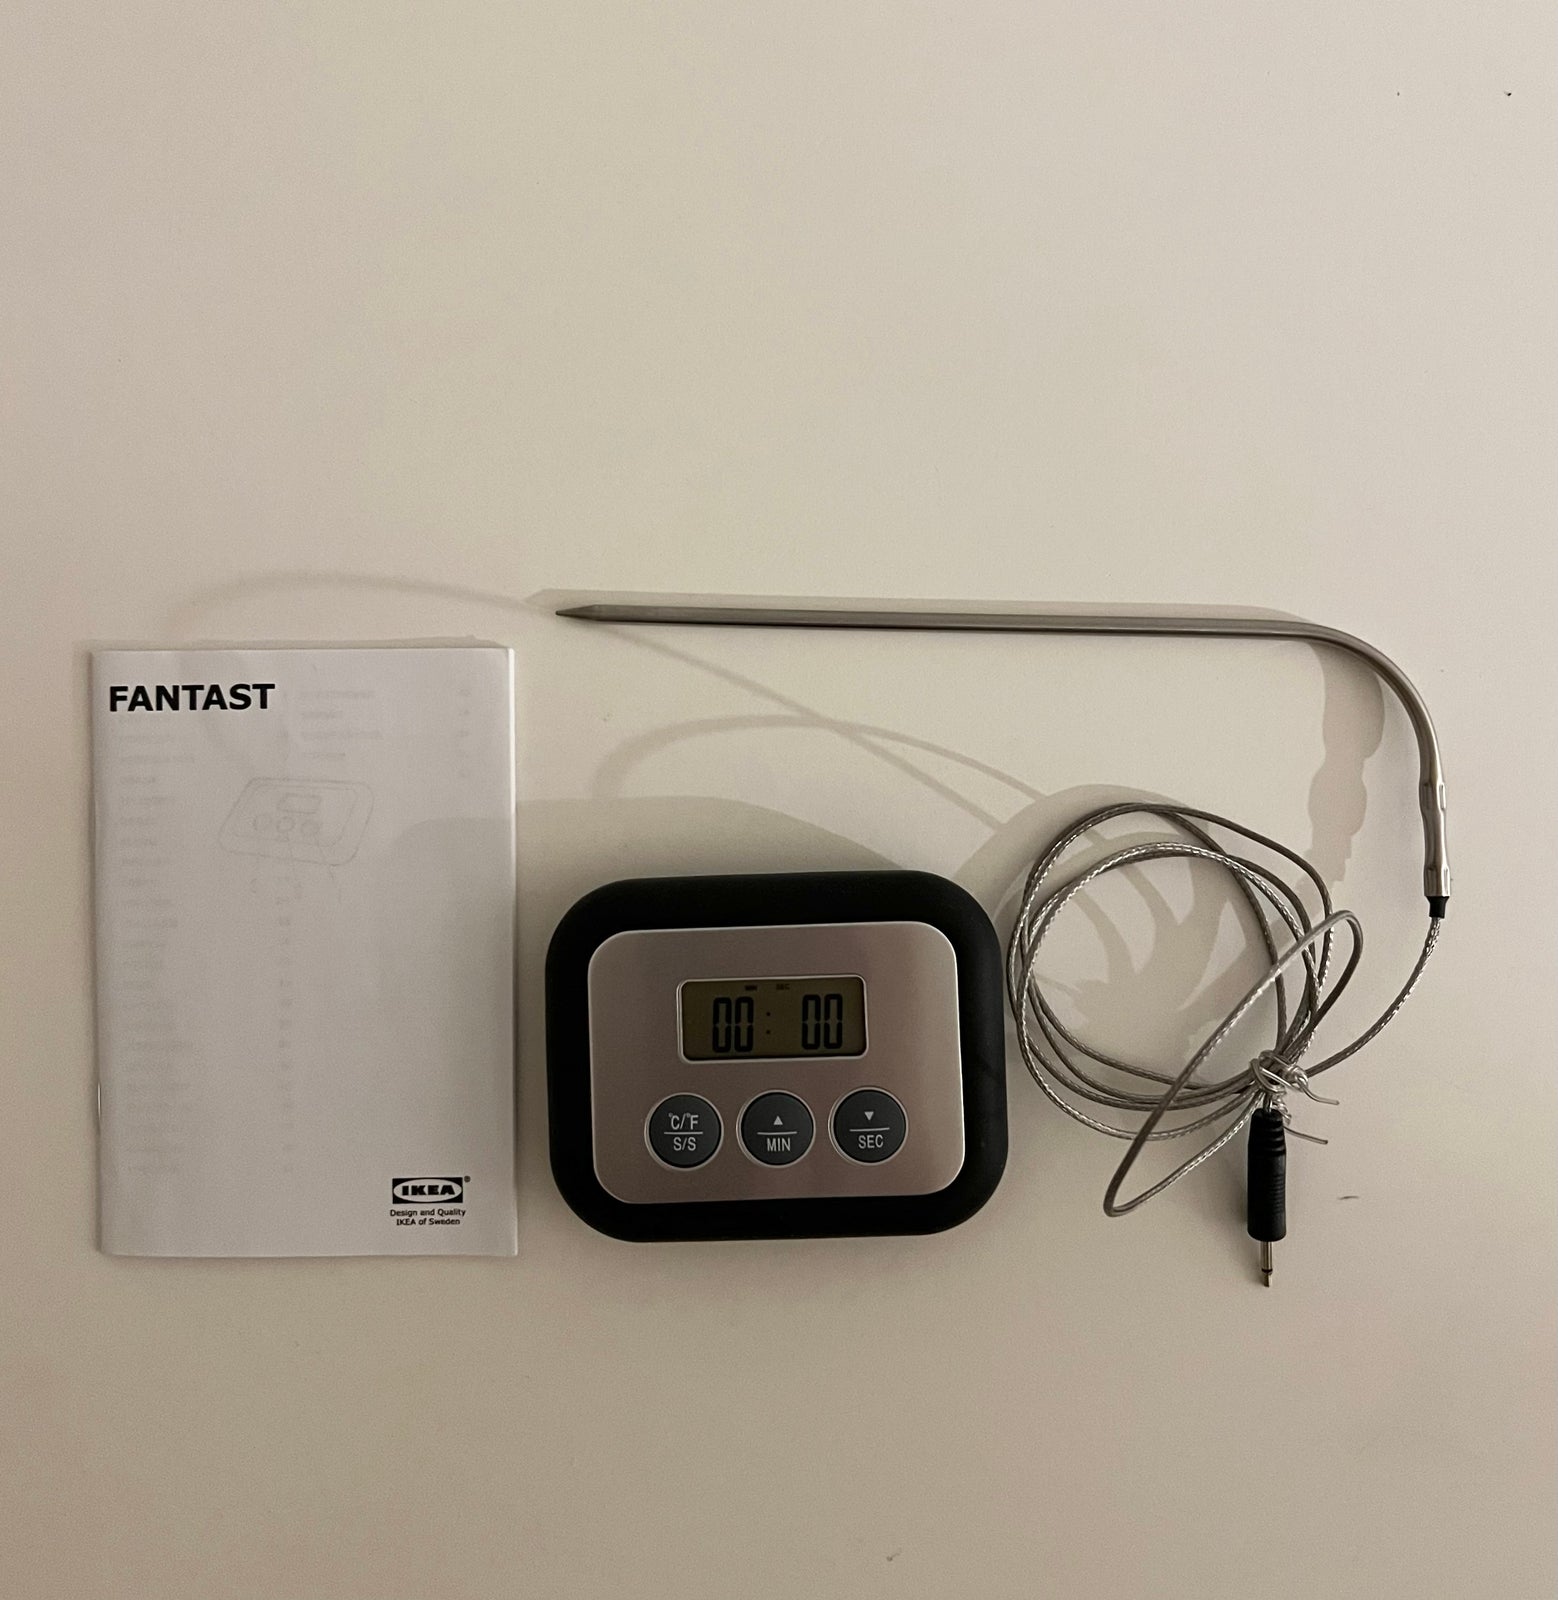 Food Thermometer/Timer, Good Condition